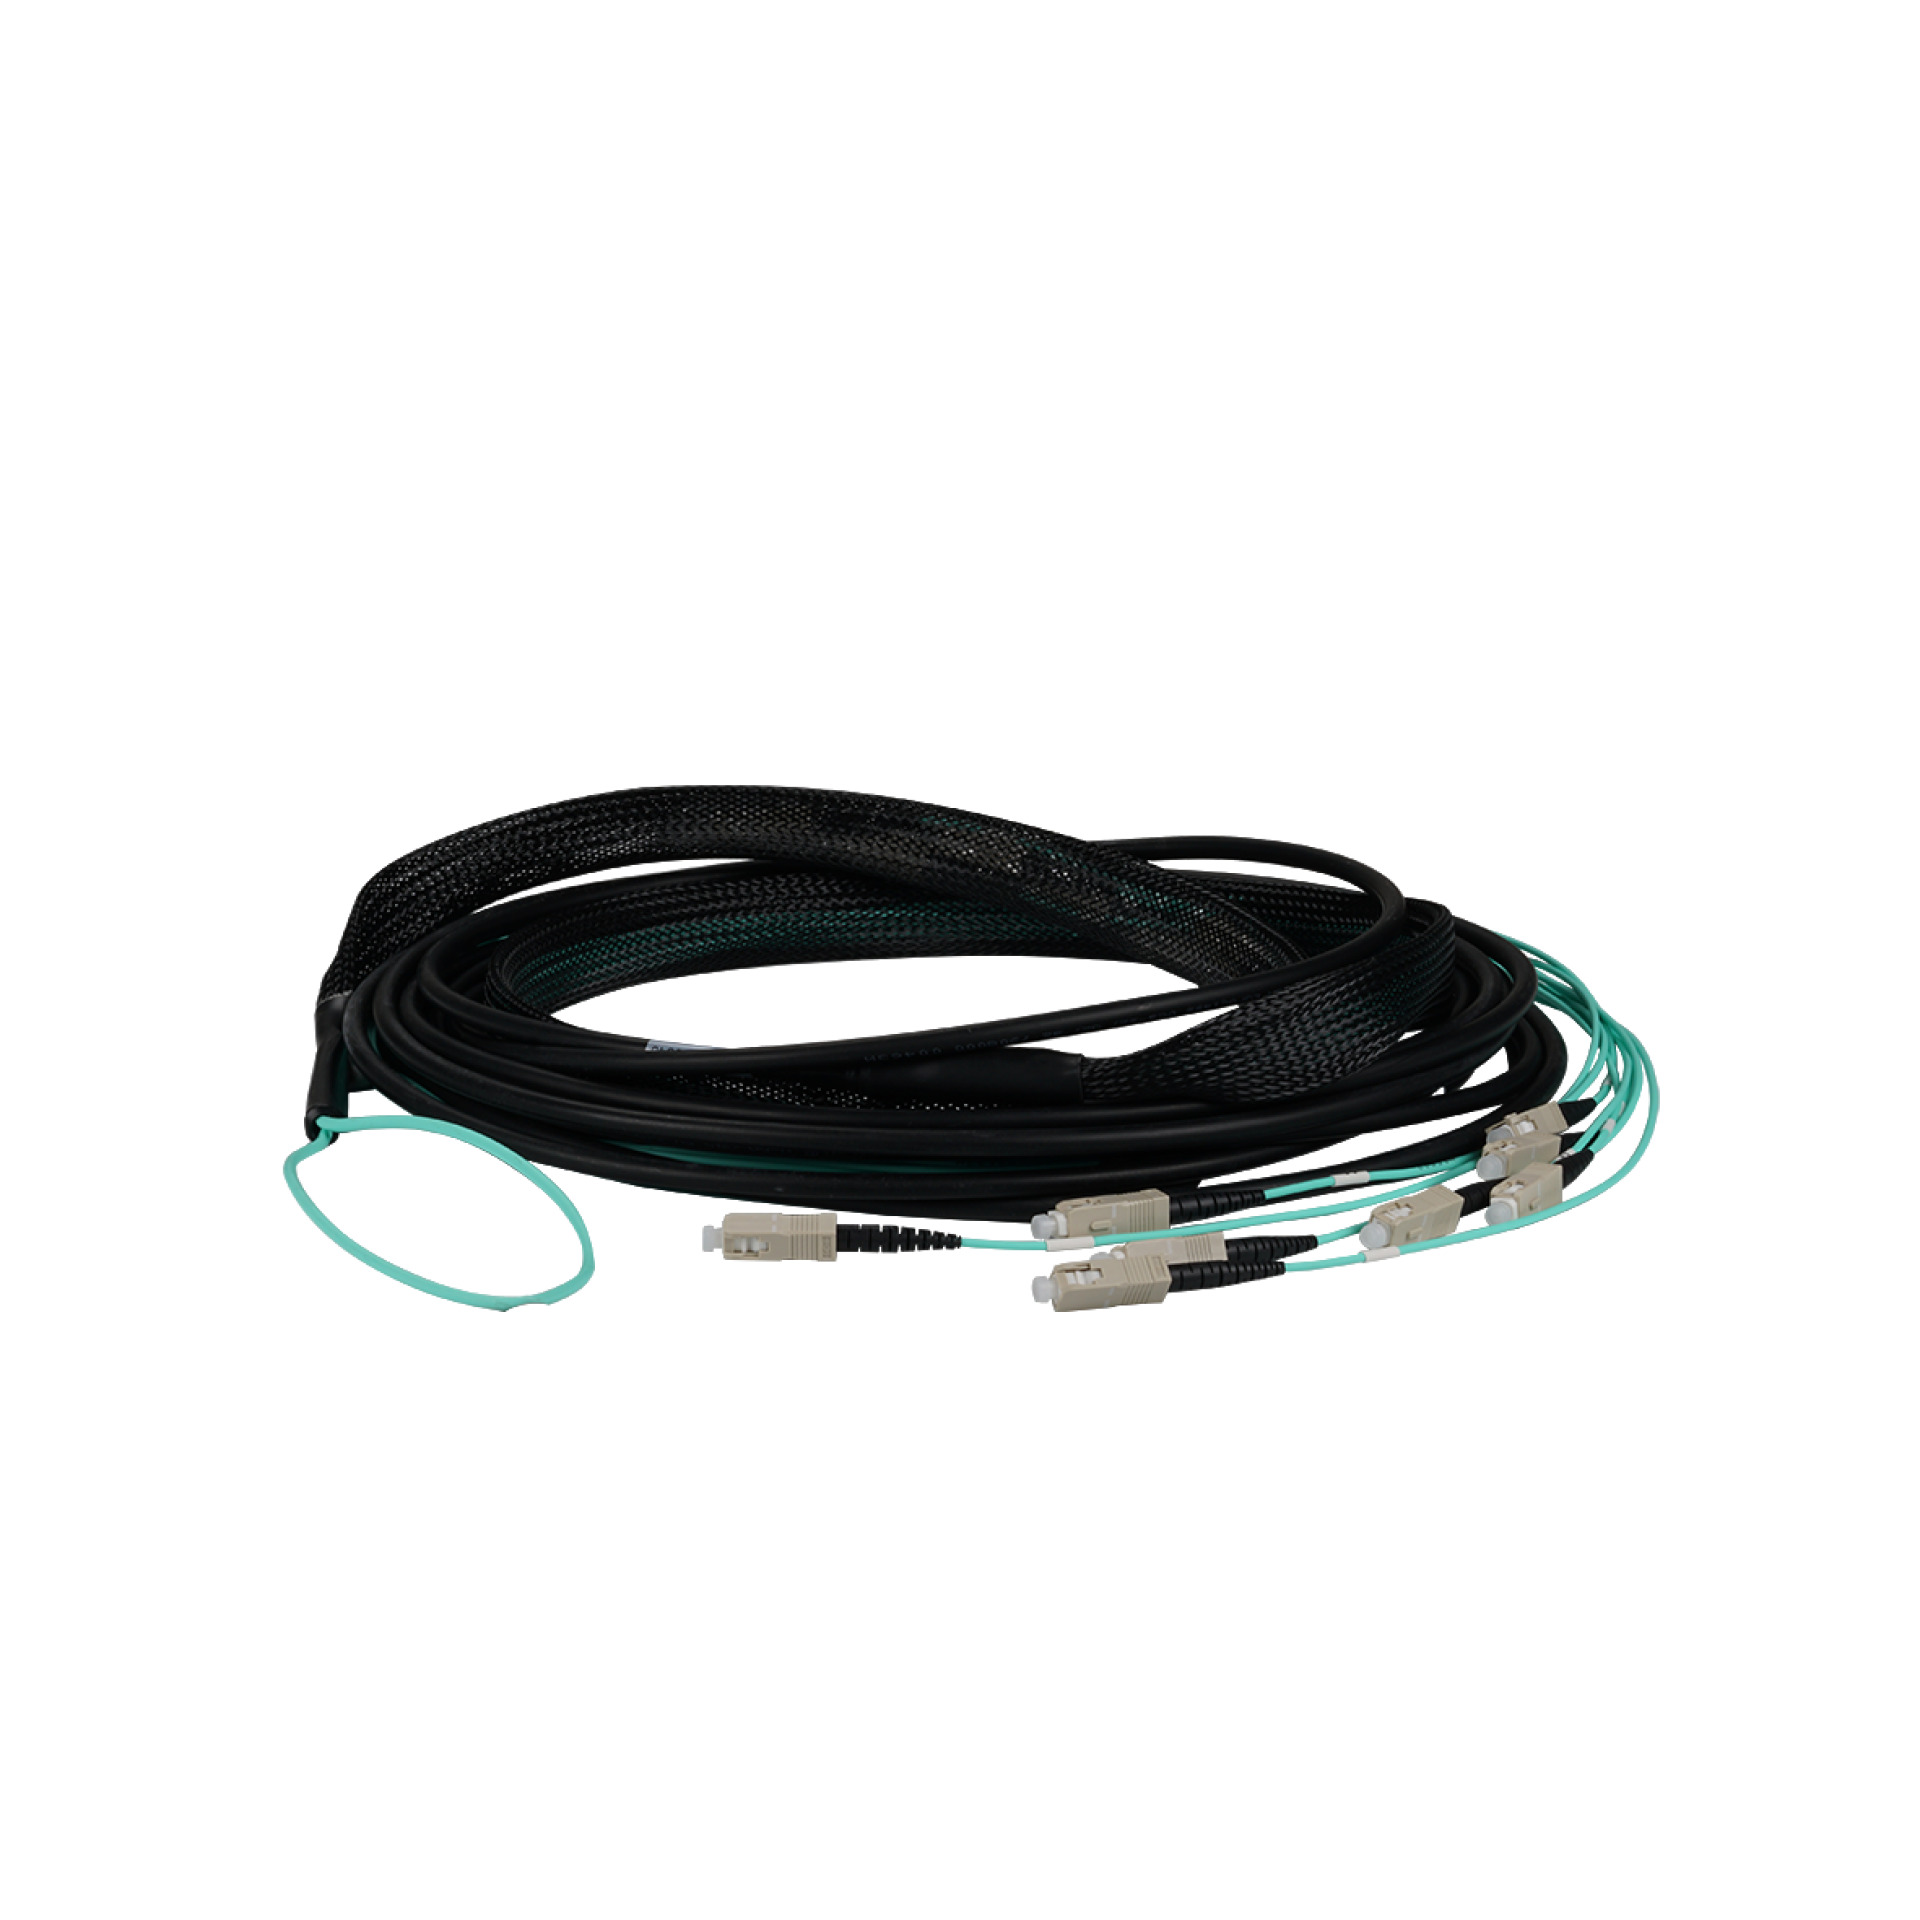 Trunk cable U-DQ(ZN)BH 8G 50/125, SC/SC OM3 40m